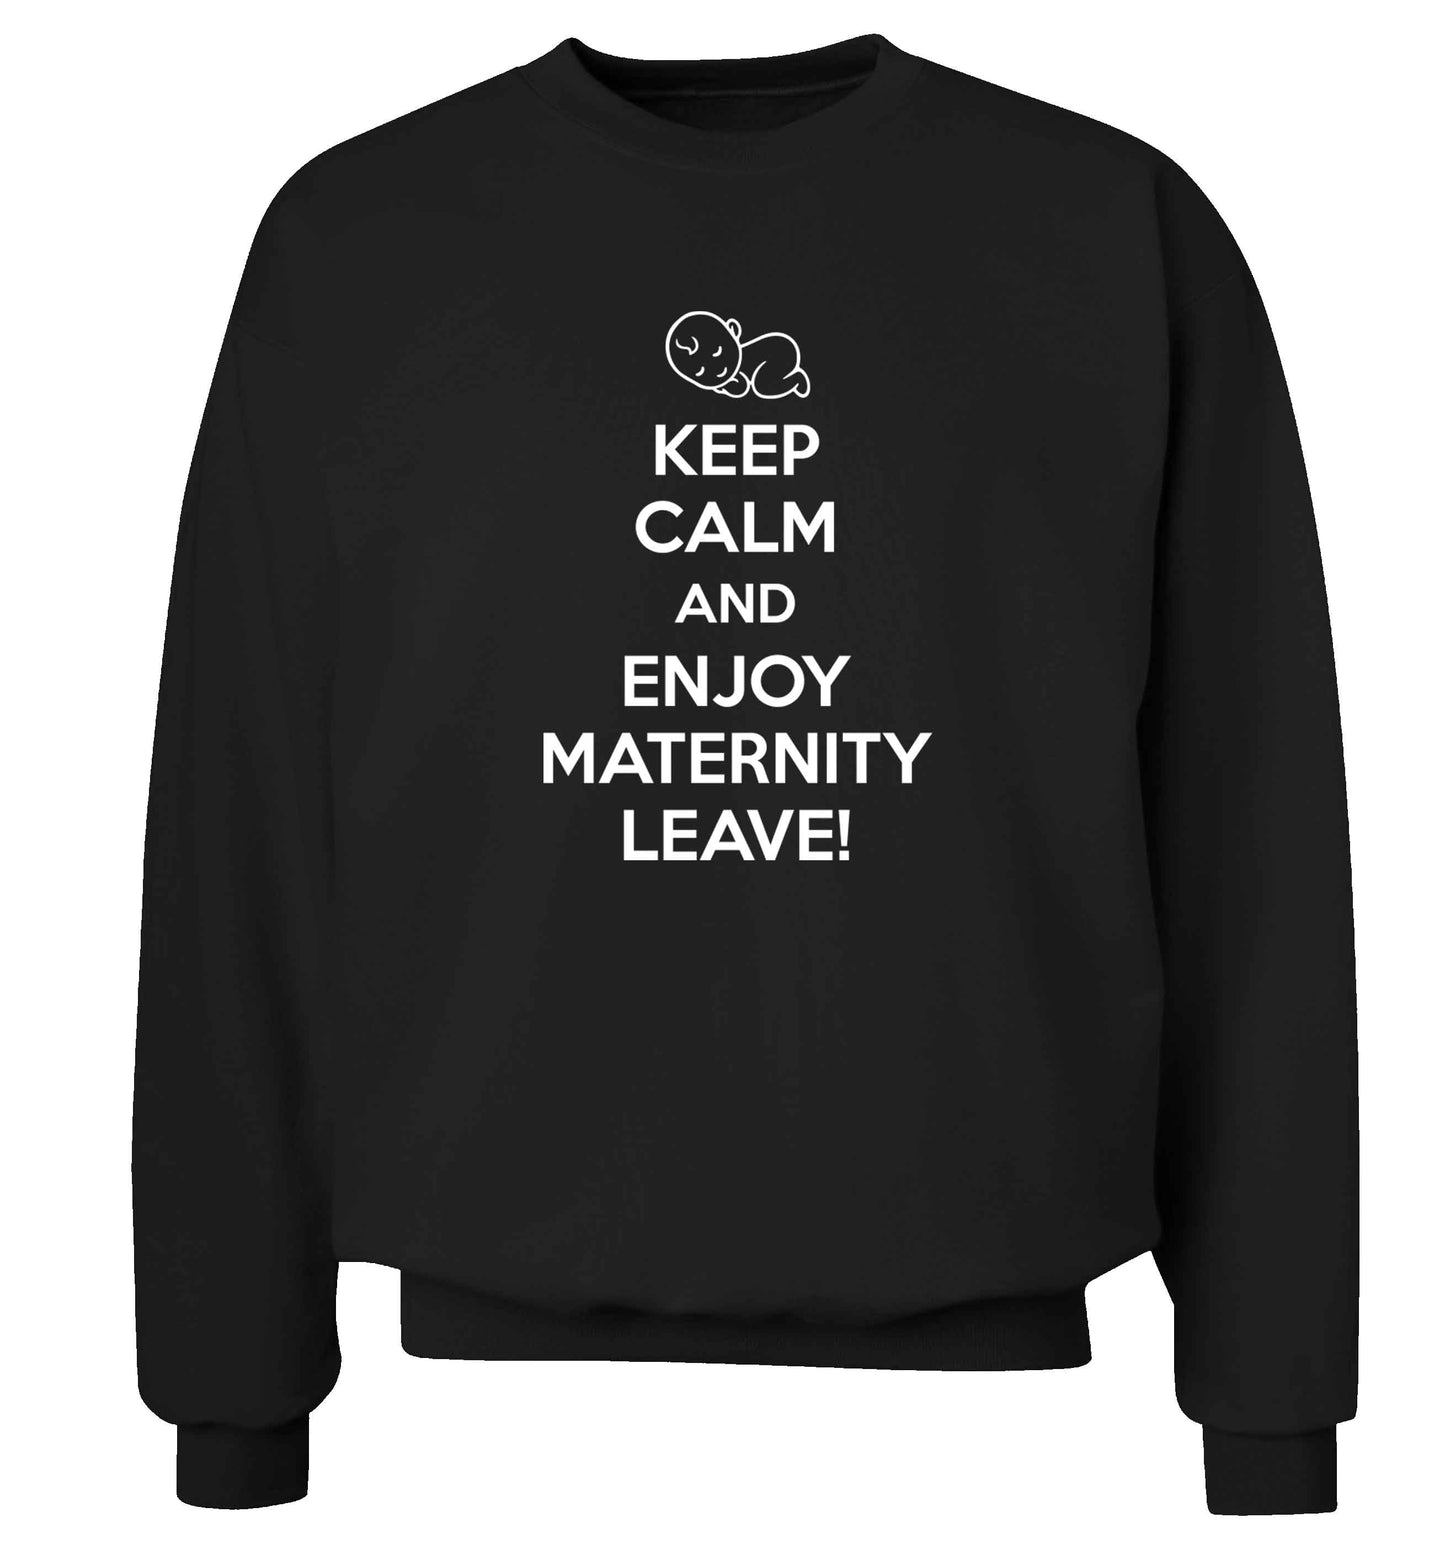 Keep calm and enjoy maternity leave Adult's unisex black Sweater 2XL